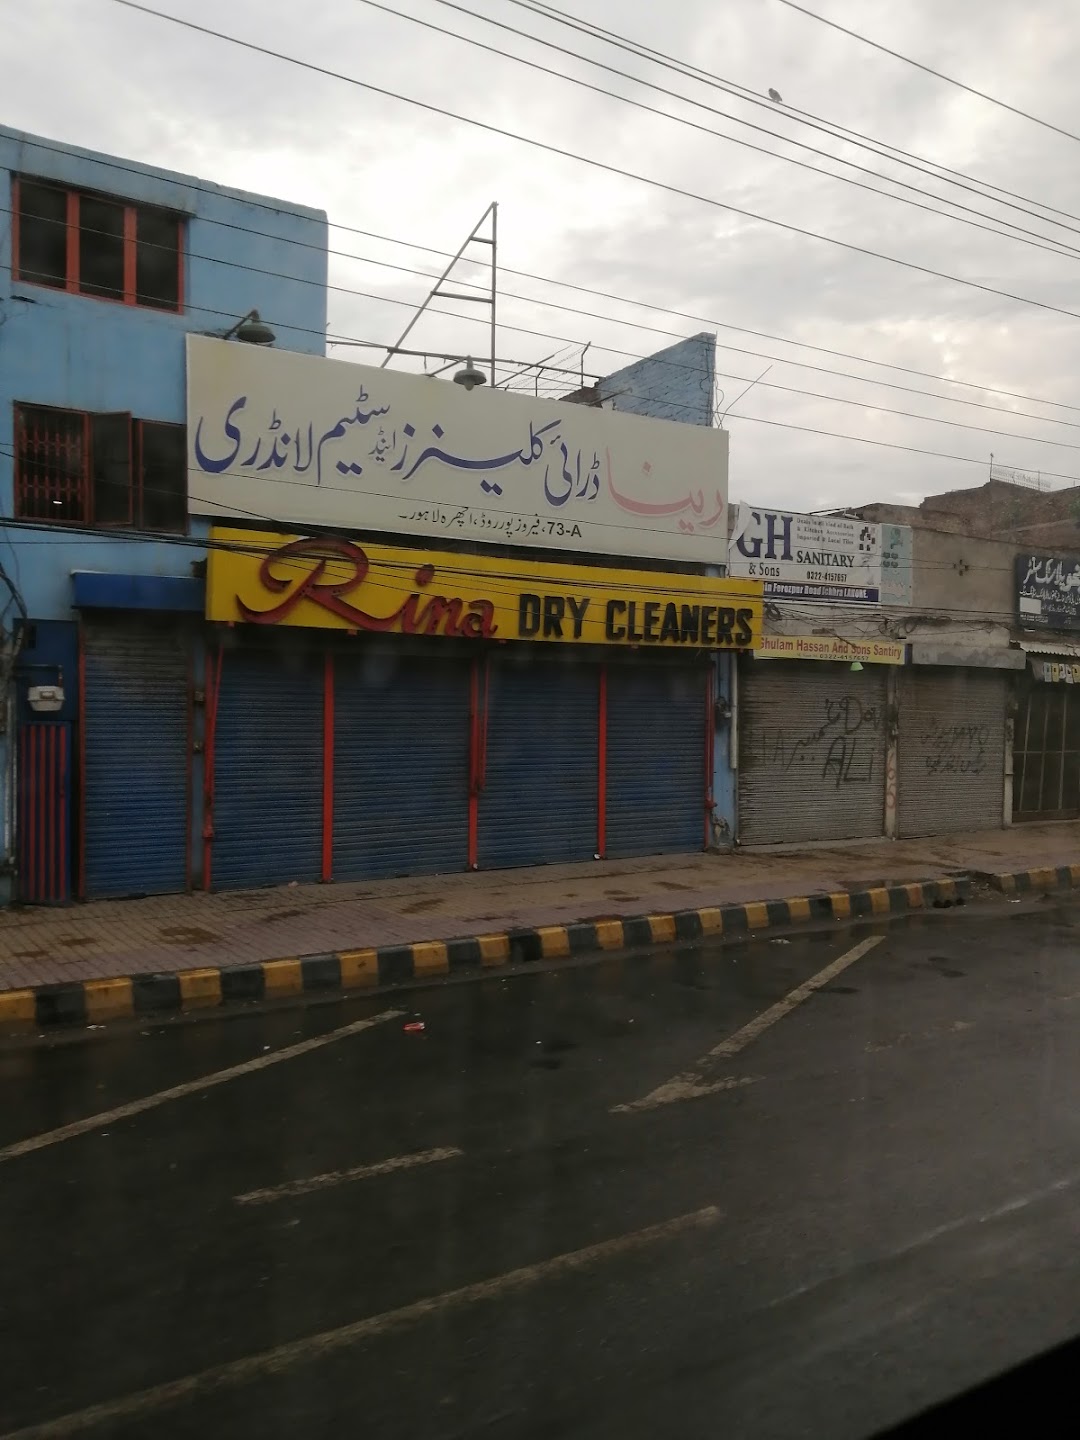 Rina Dry Cleaners & Steam Laundry